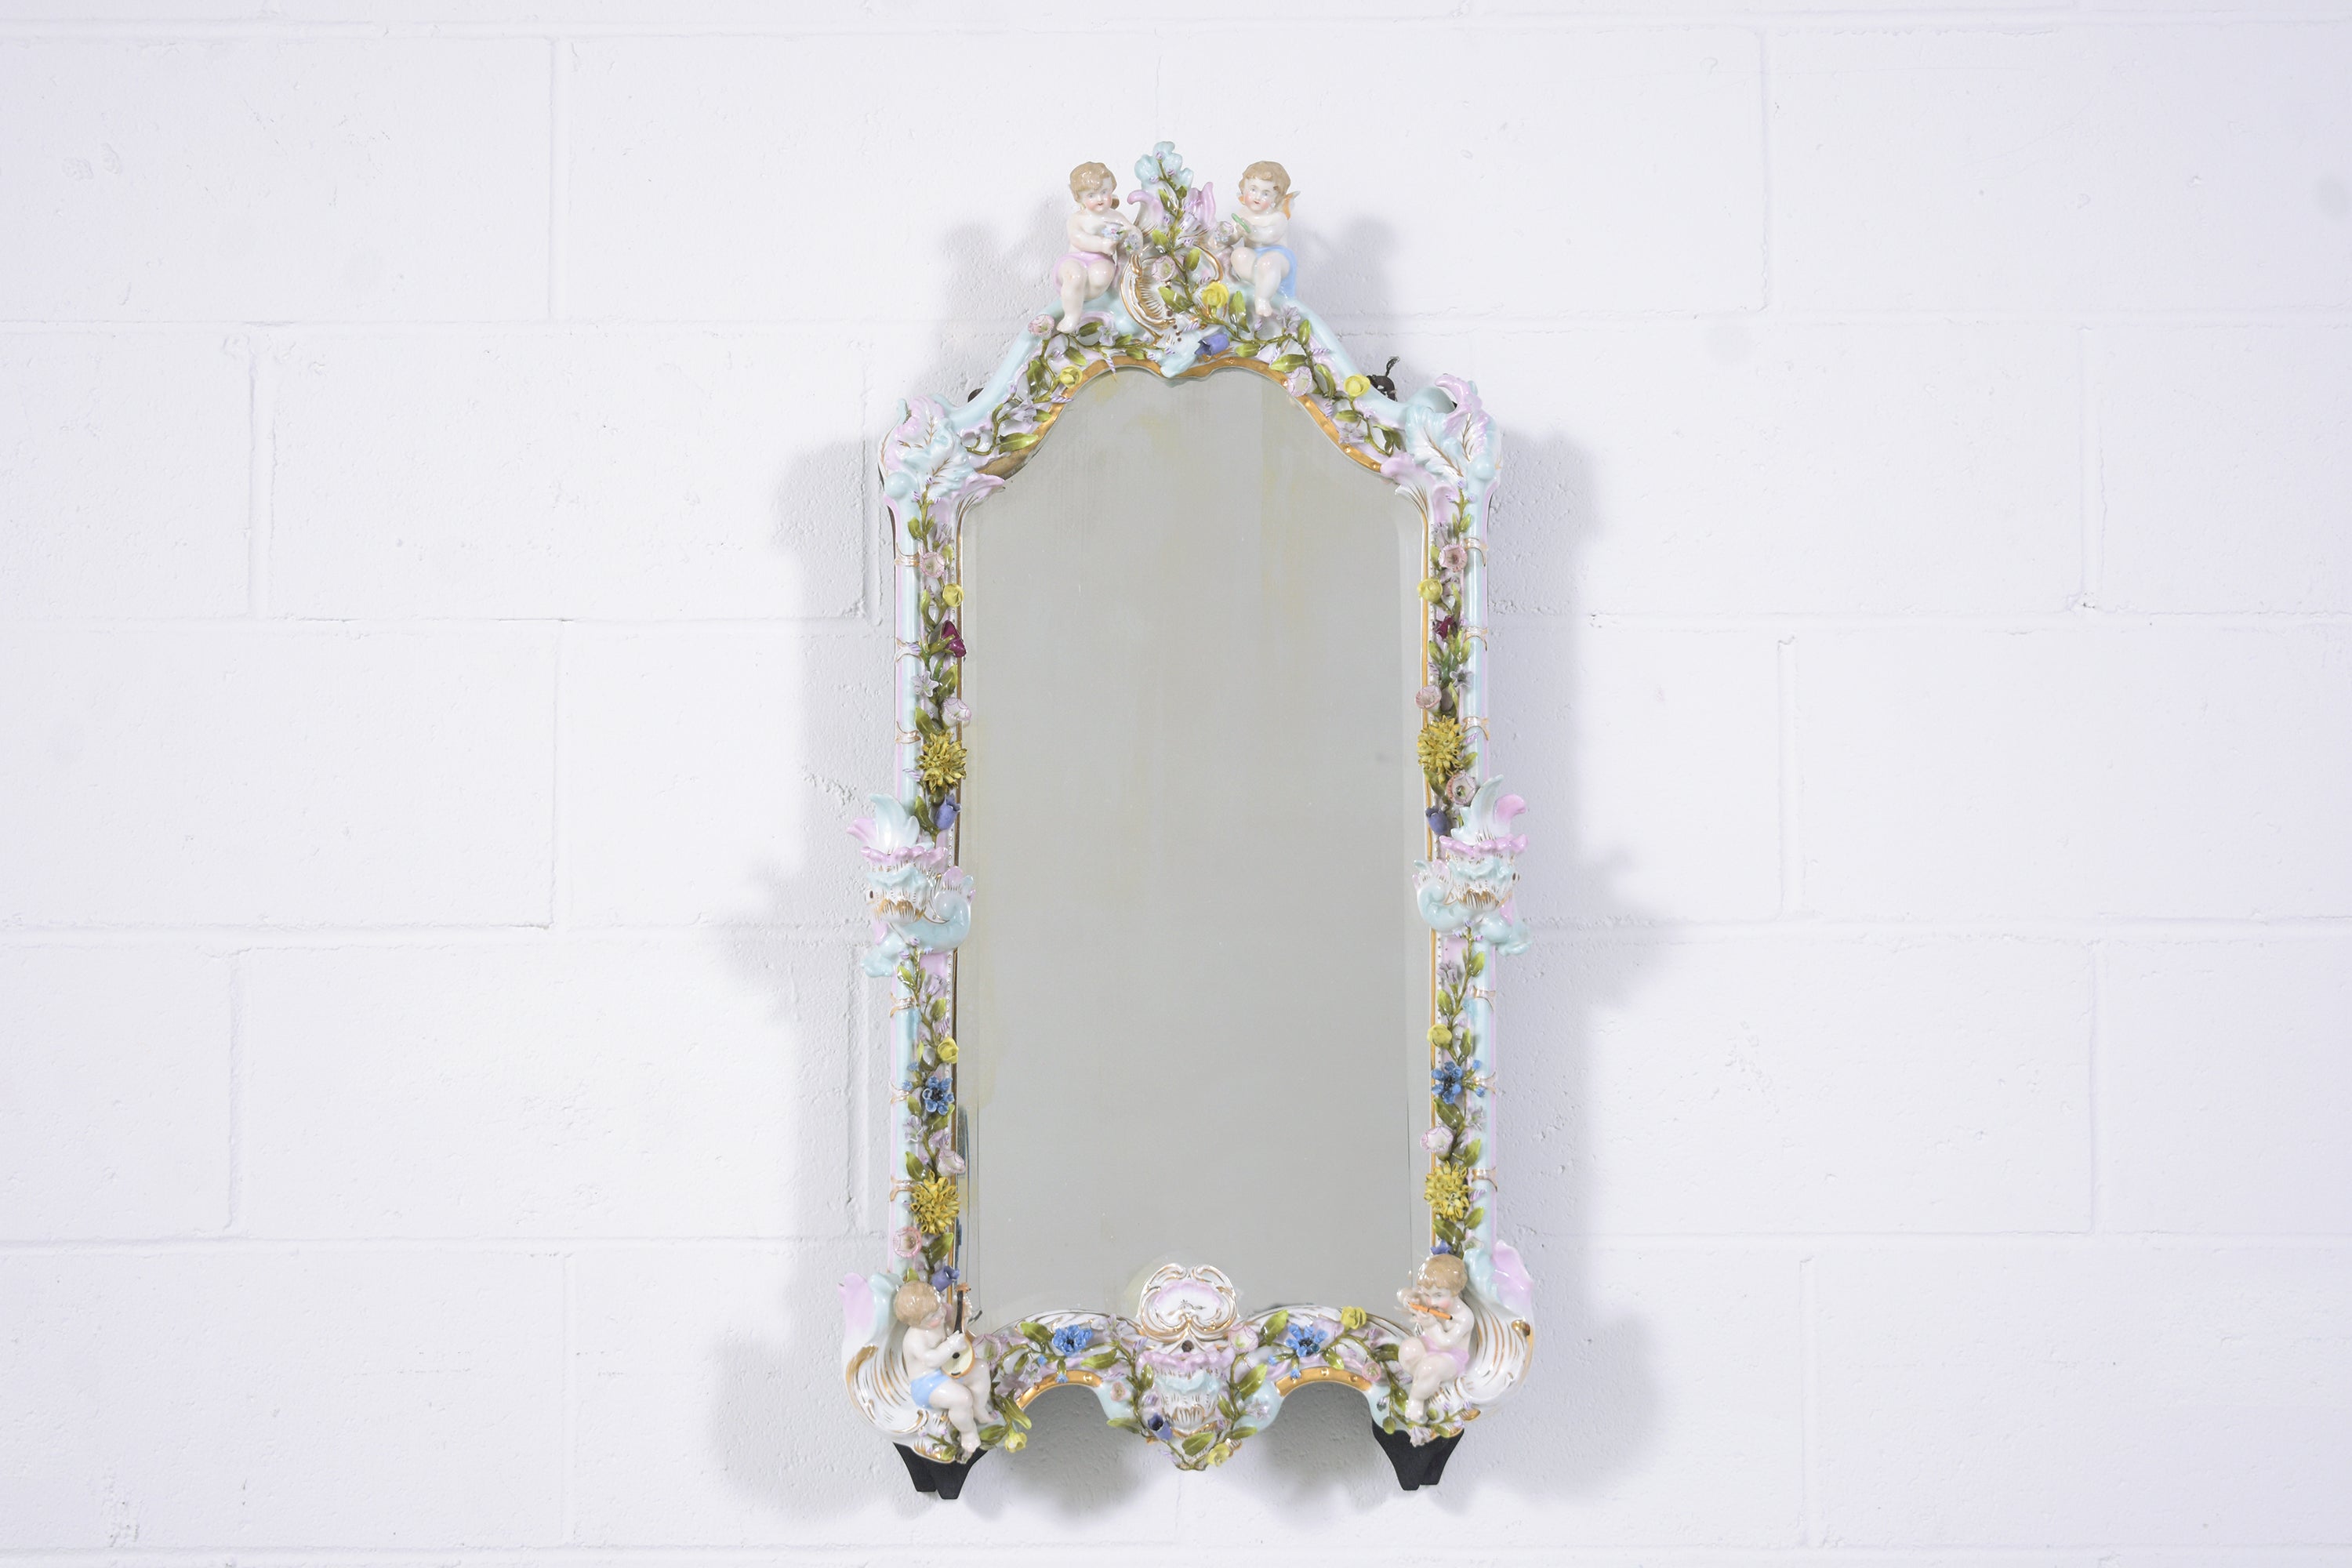 Embrace the elegance of our early 1900s Belle Époque style German mirror, masterfully crafted from porcelain and in very good condition. This remarkable piece showcases a richly detailed mirror frame, adorned with cherubs playing musical instruments